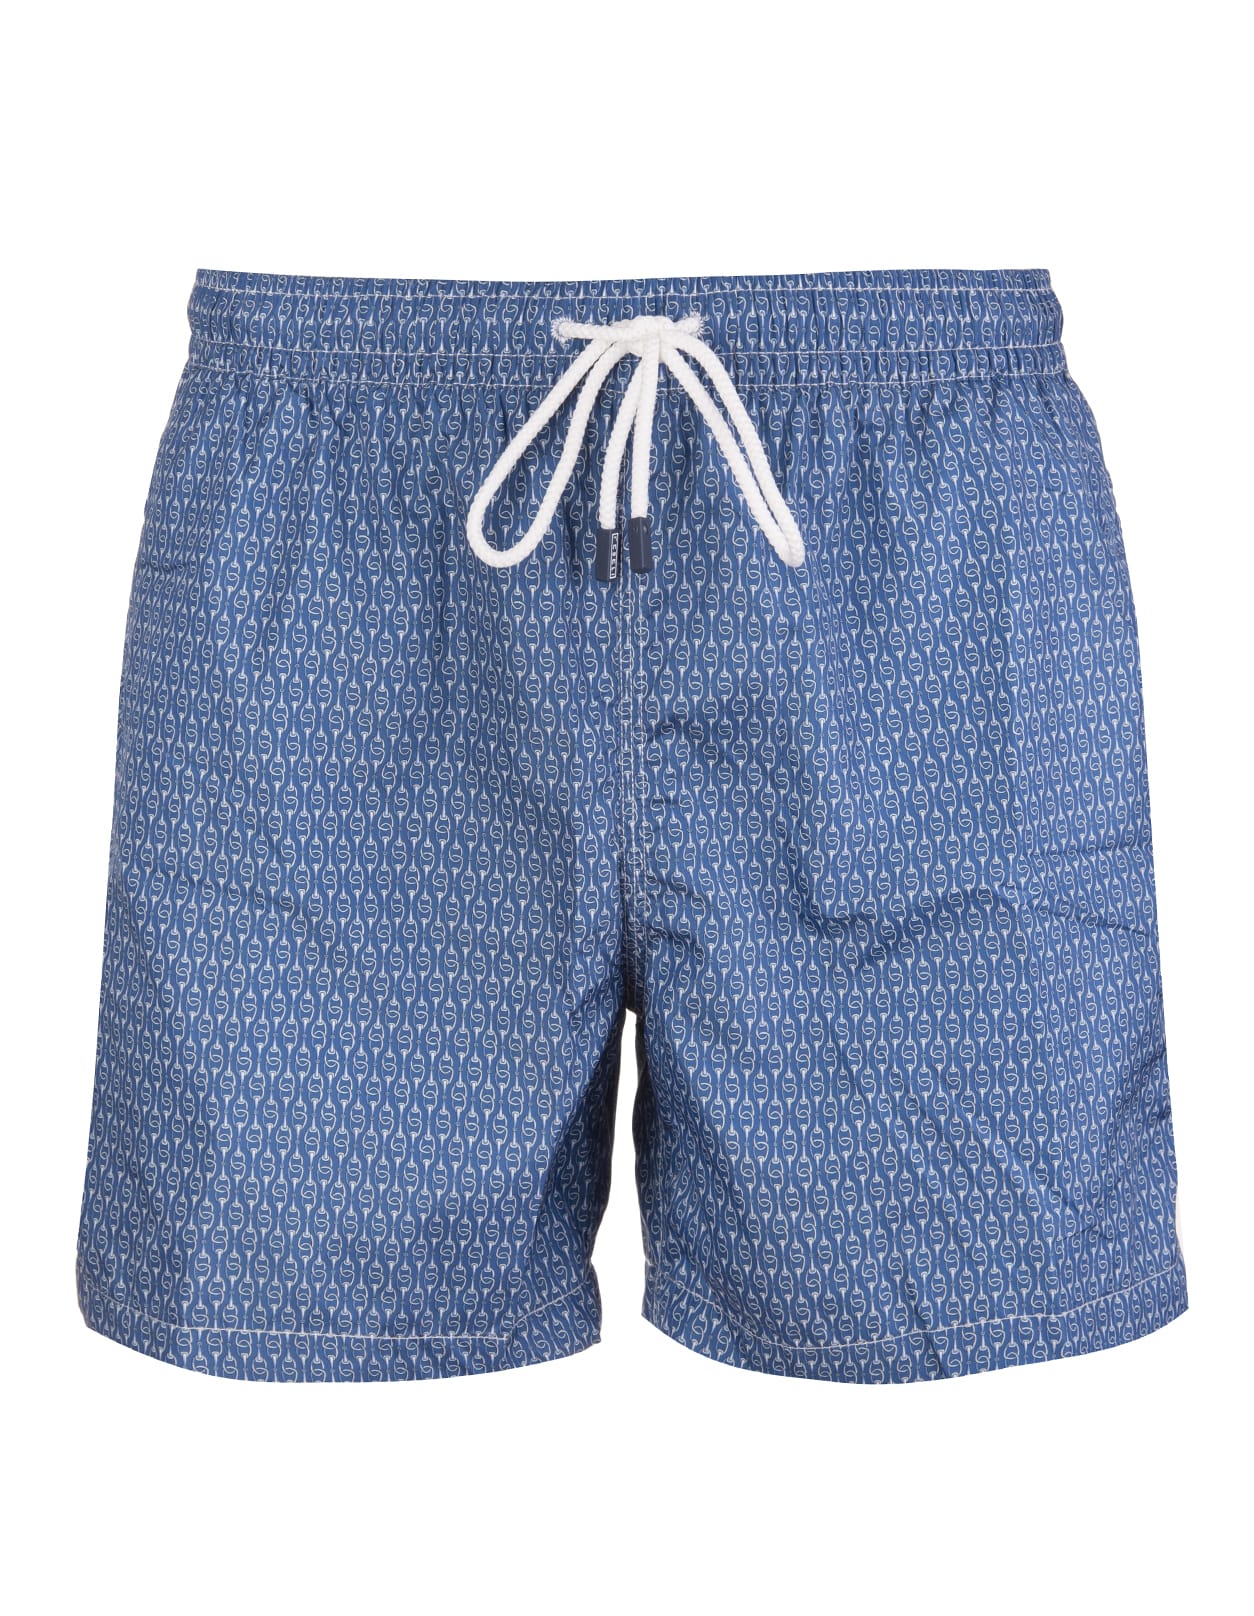 Fedeli Dark Blue Swimming Trunks With Contrast Micro Pattern